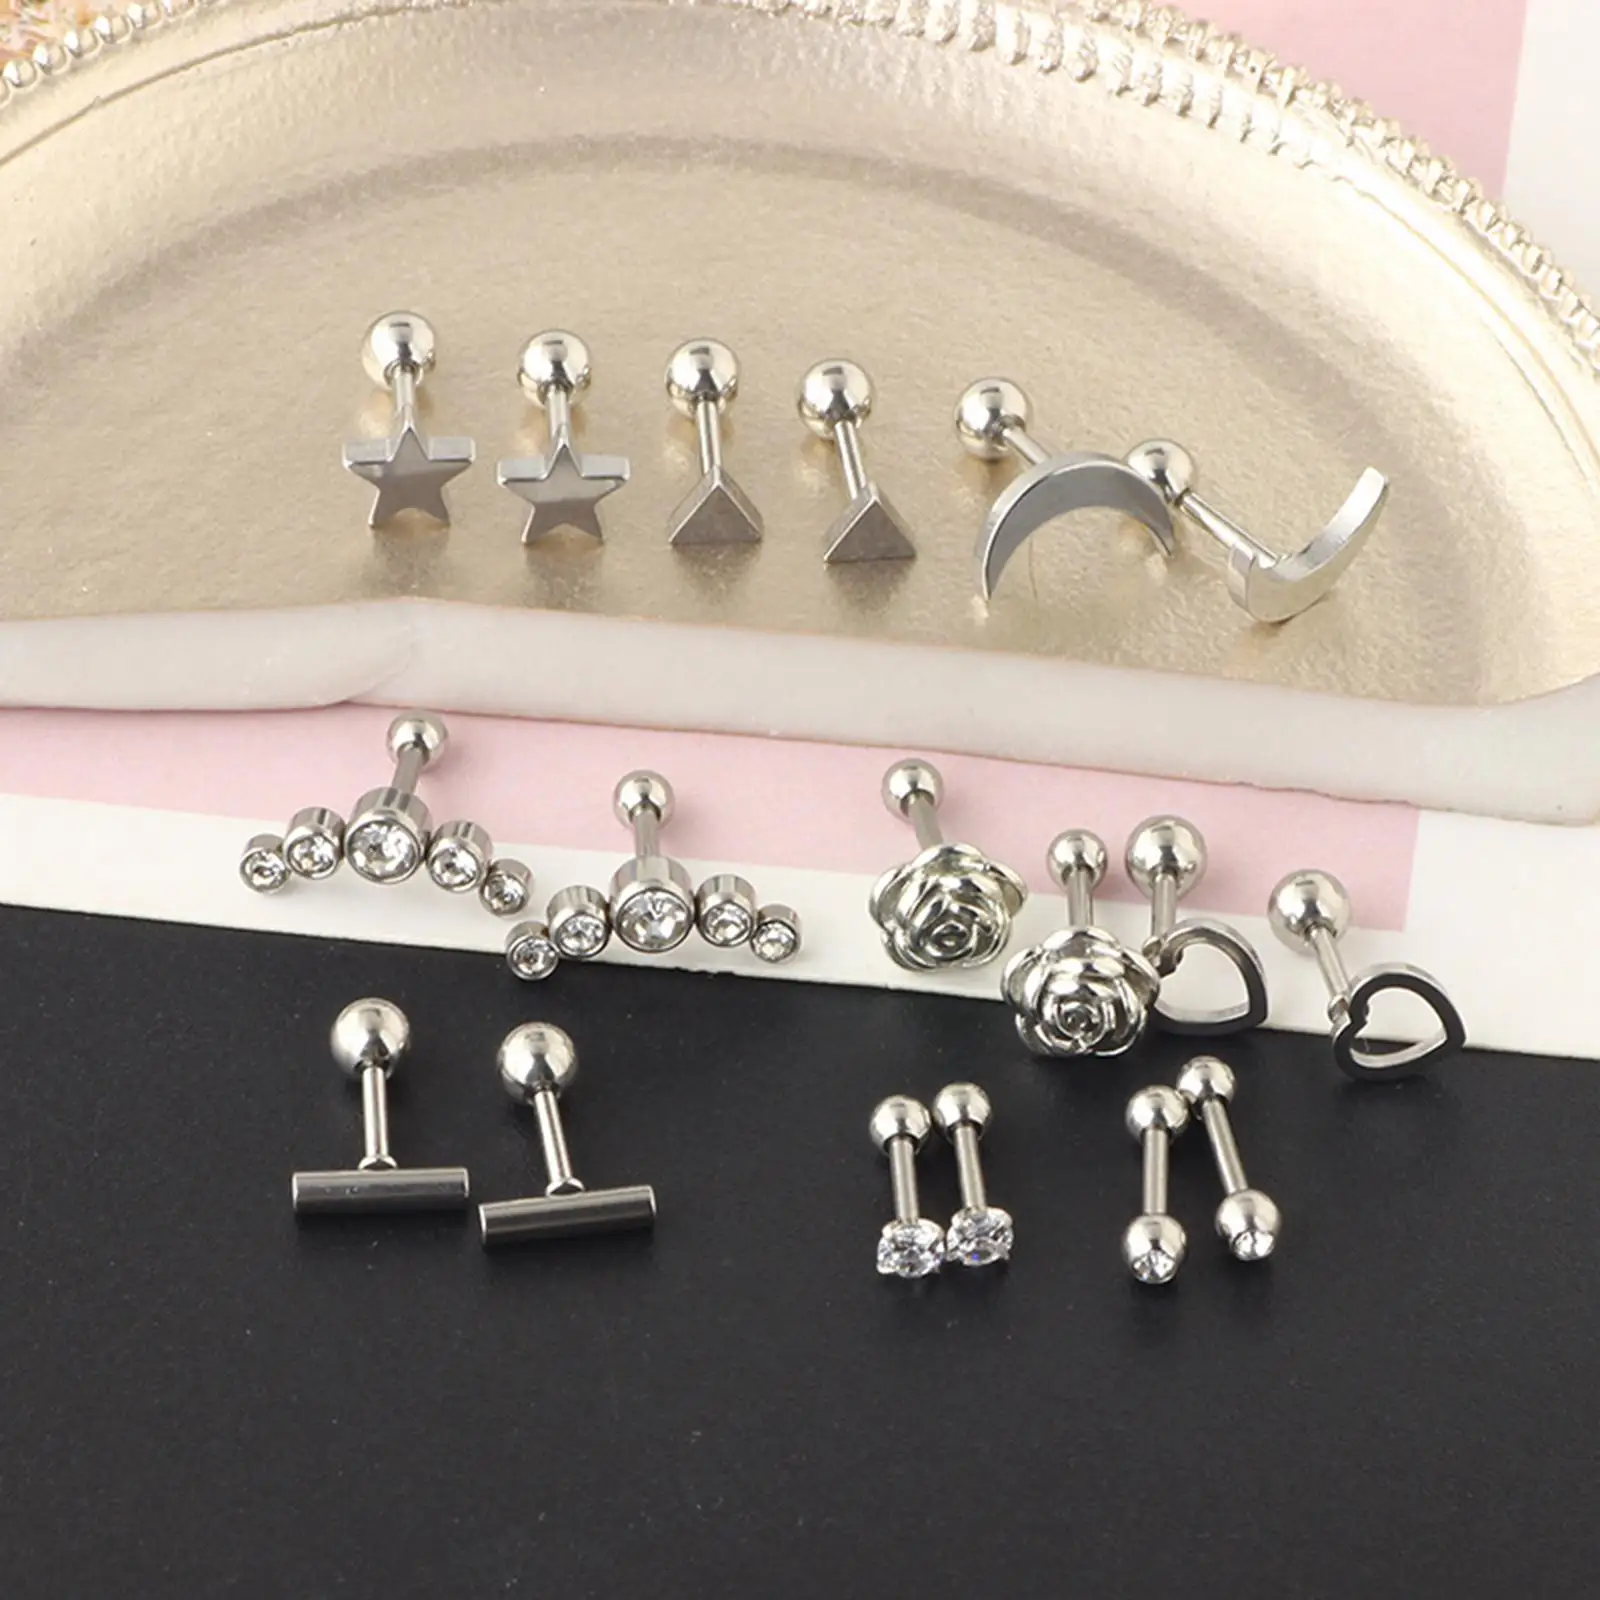 18Pcs Stud Earrings Set Fashion Disc Ball Jewelry Stainless Steel 16G